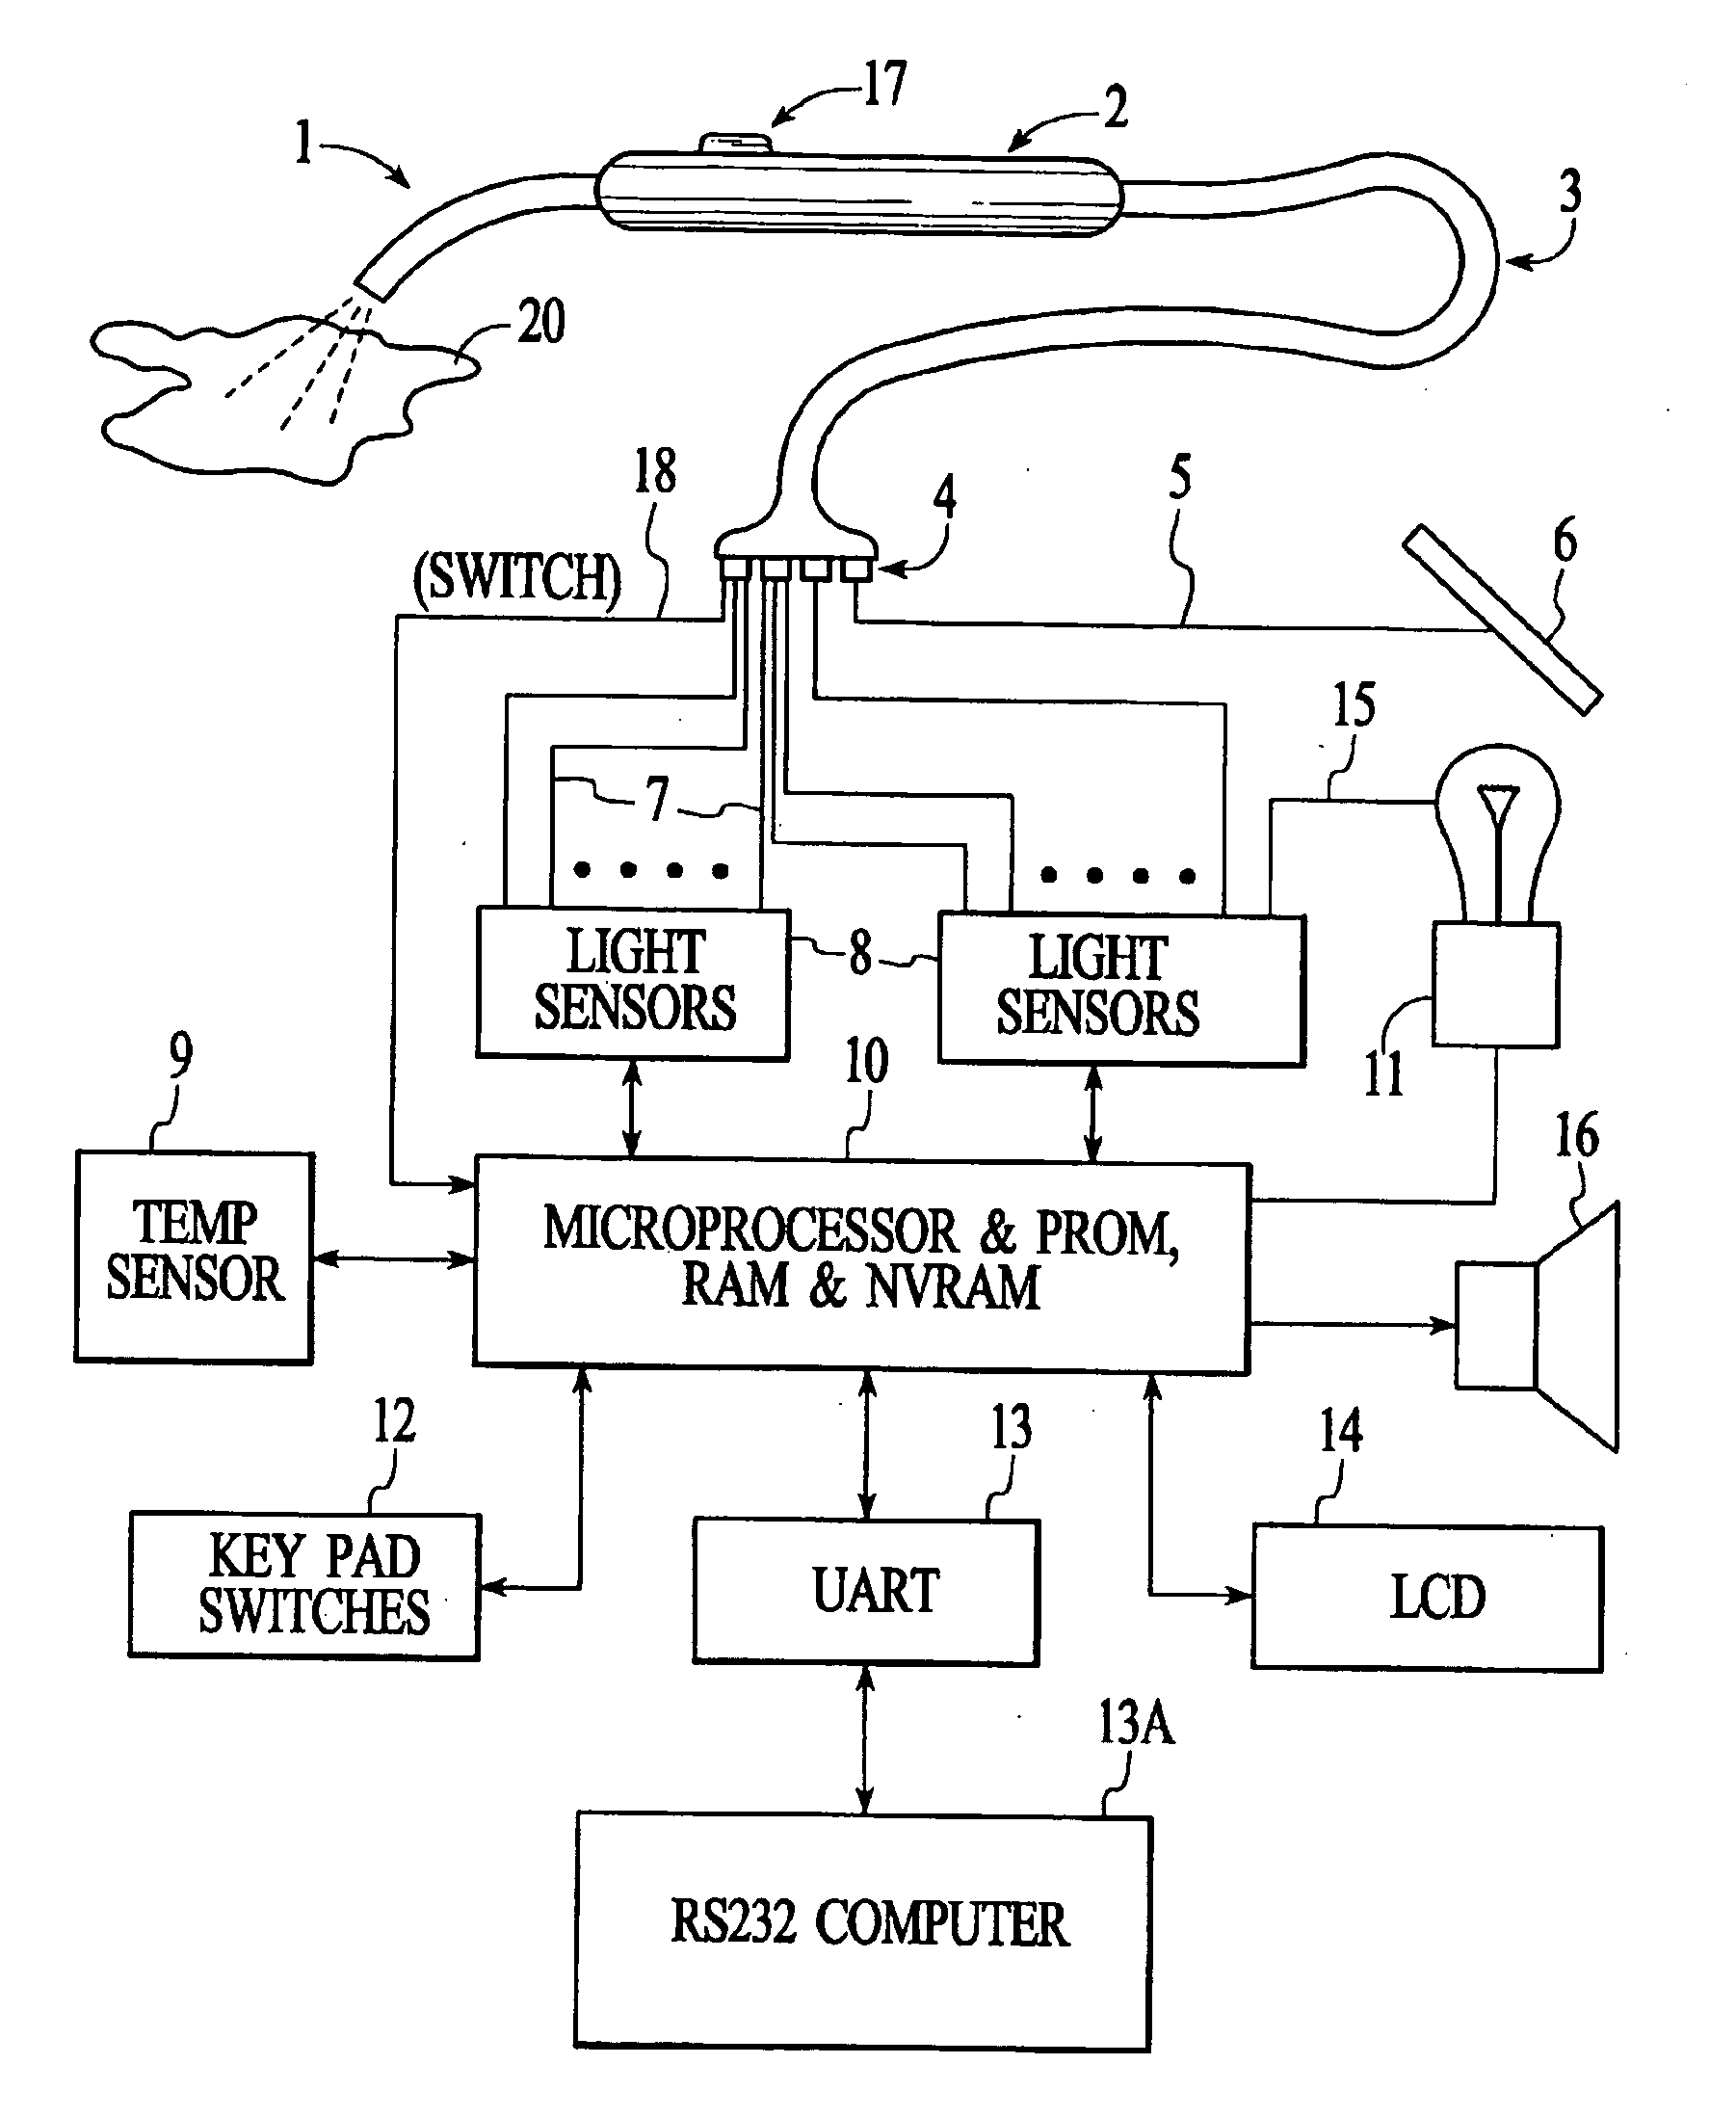 Apparatus and method for measuring optical characteristics of an object